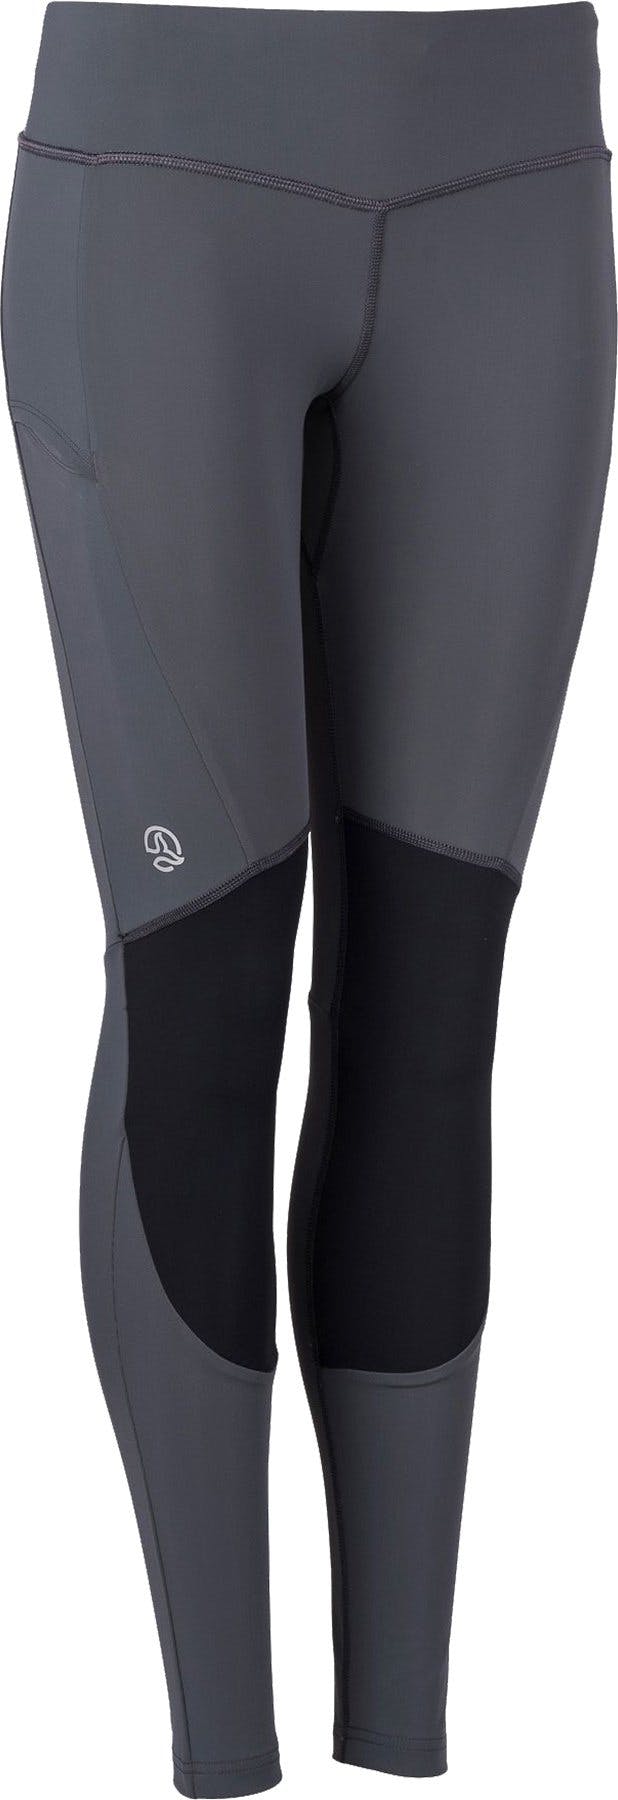 Product image for Konna Tights - Women's